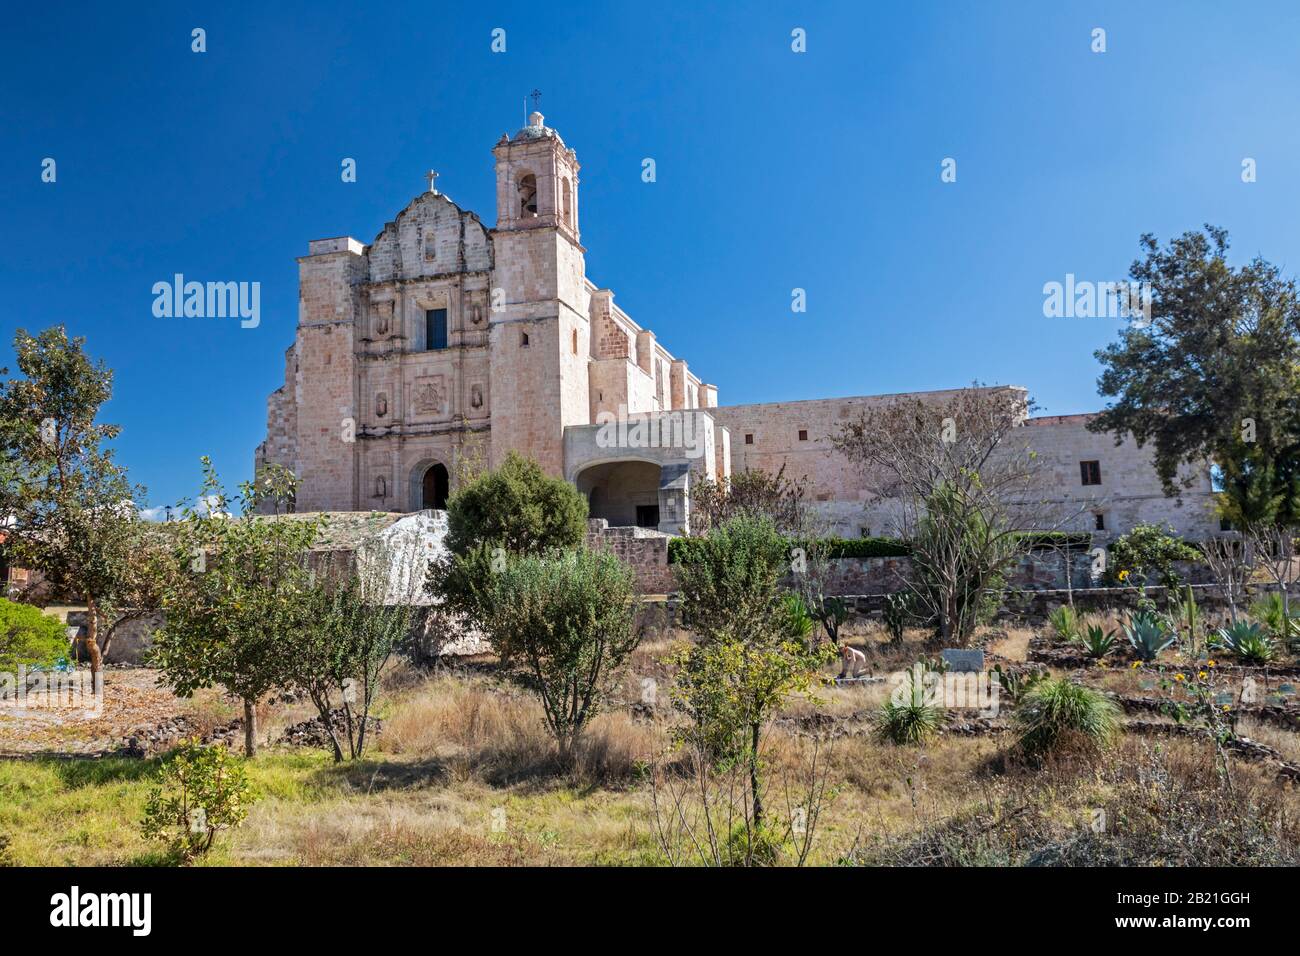 Yanhuitlan, Oaxaca, Mexico - The Templo y Ex-convento de Santo Domingo, the church and mission built in the 16th century by the Dominicans. Stock Photo